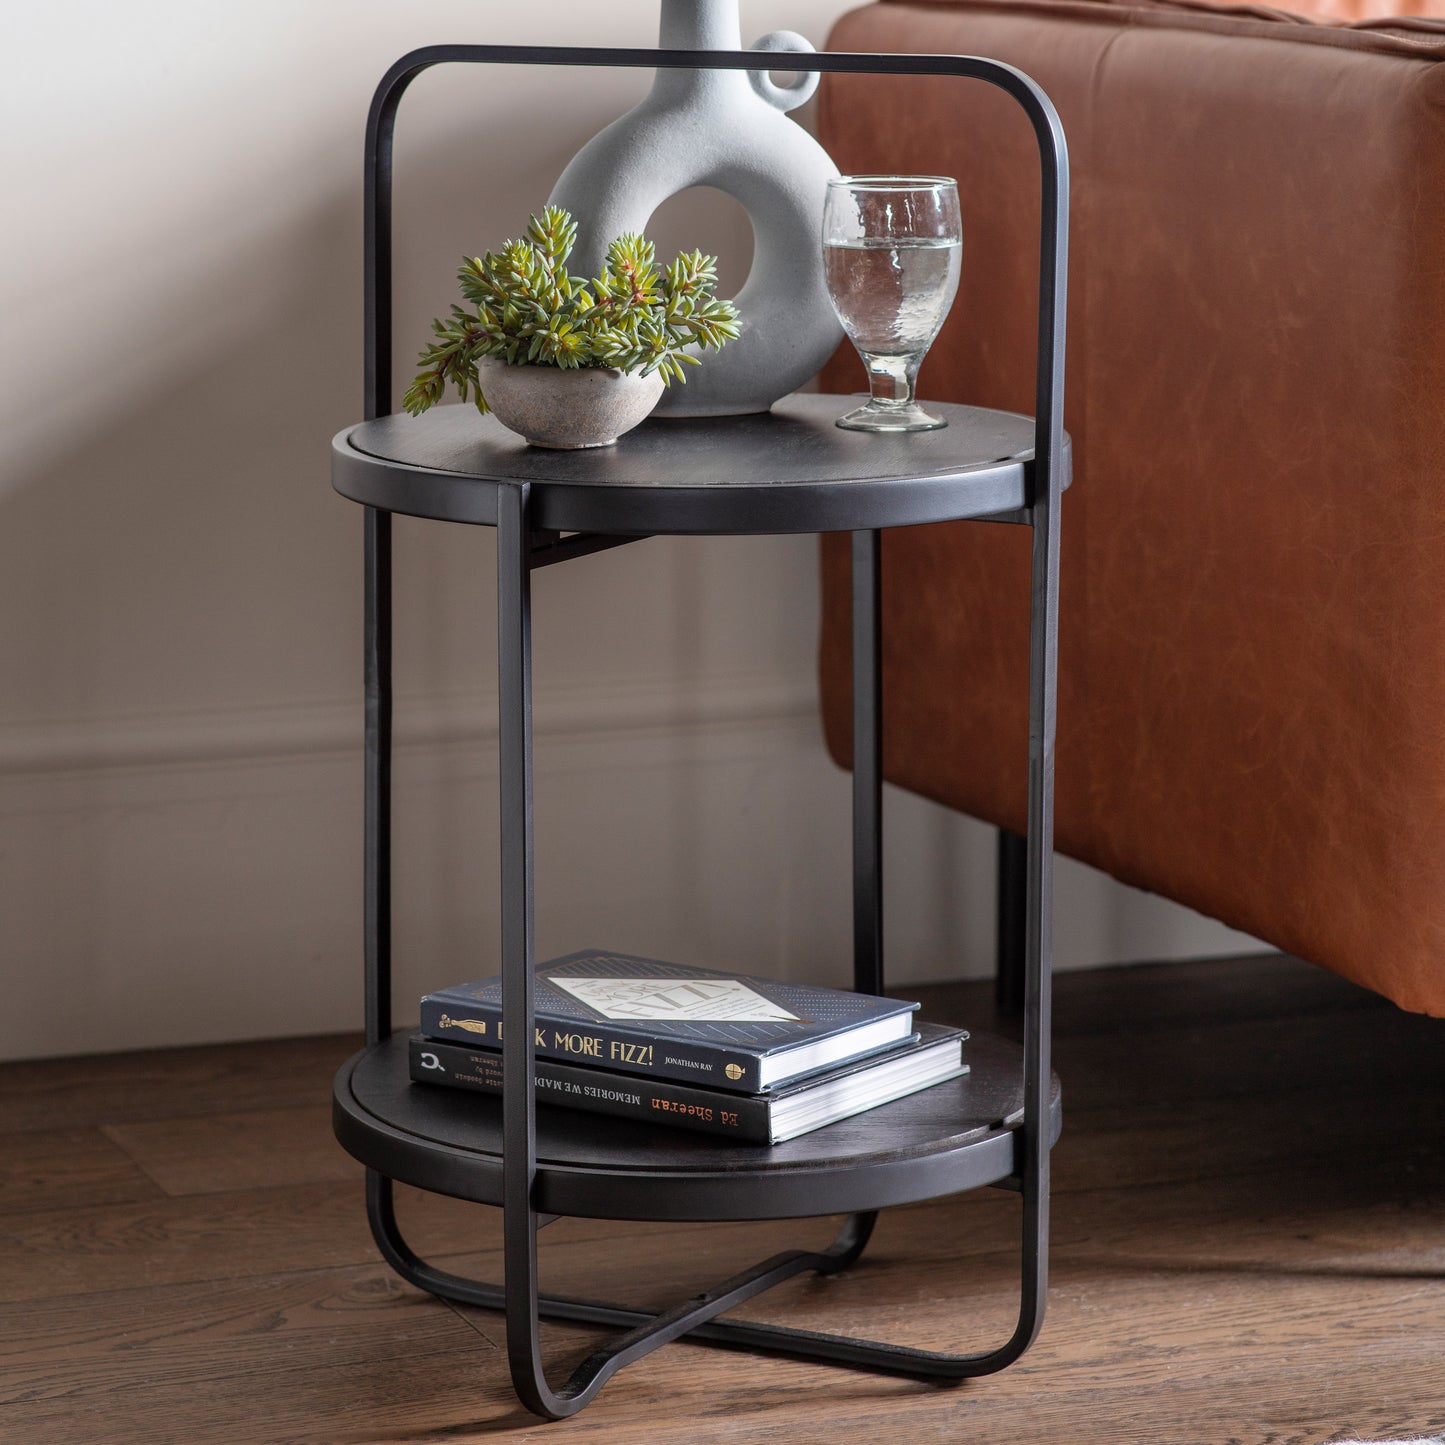 Load image into Gallery viewer, A Kikiathome.co.uk Lutton Side Table Black 425x425x720mm with a vase and books - perfect home furniture for interior decor.
